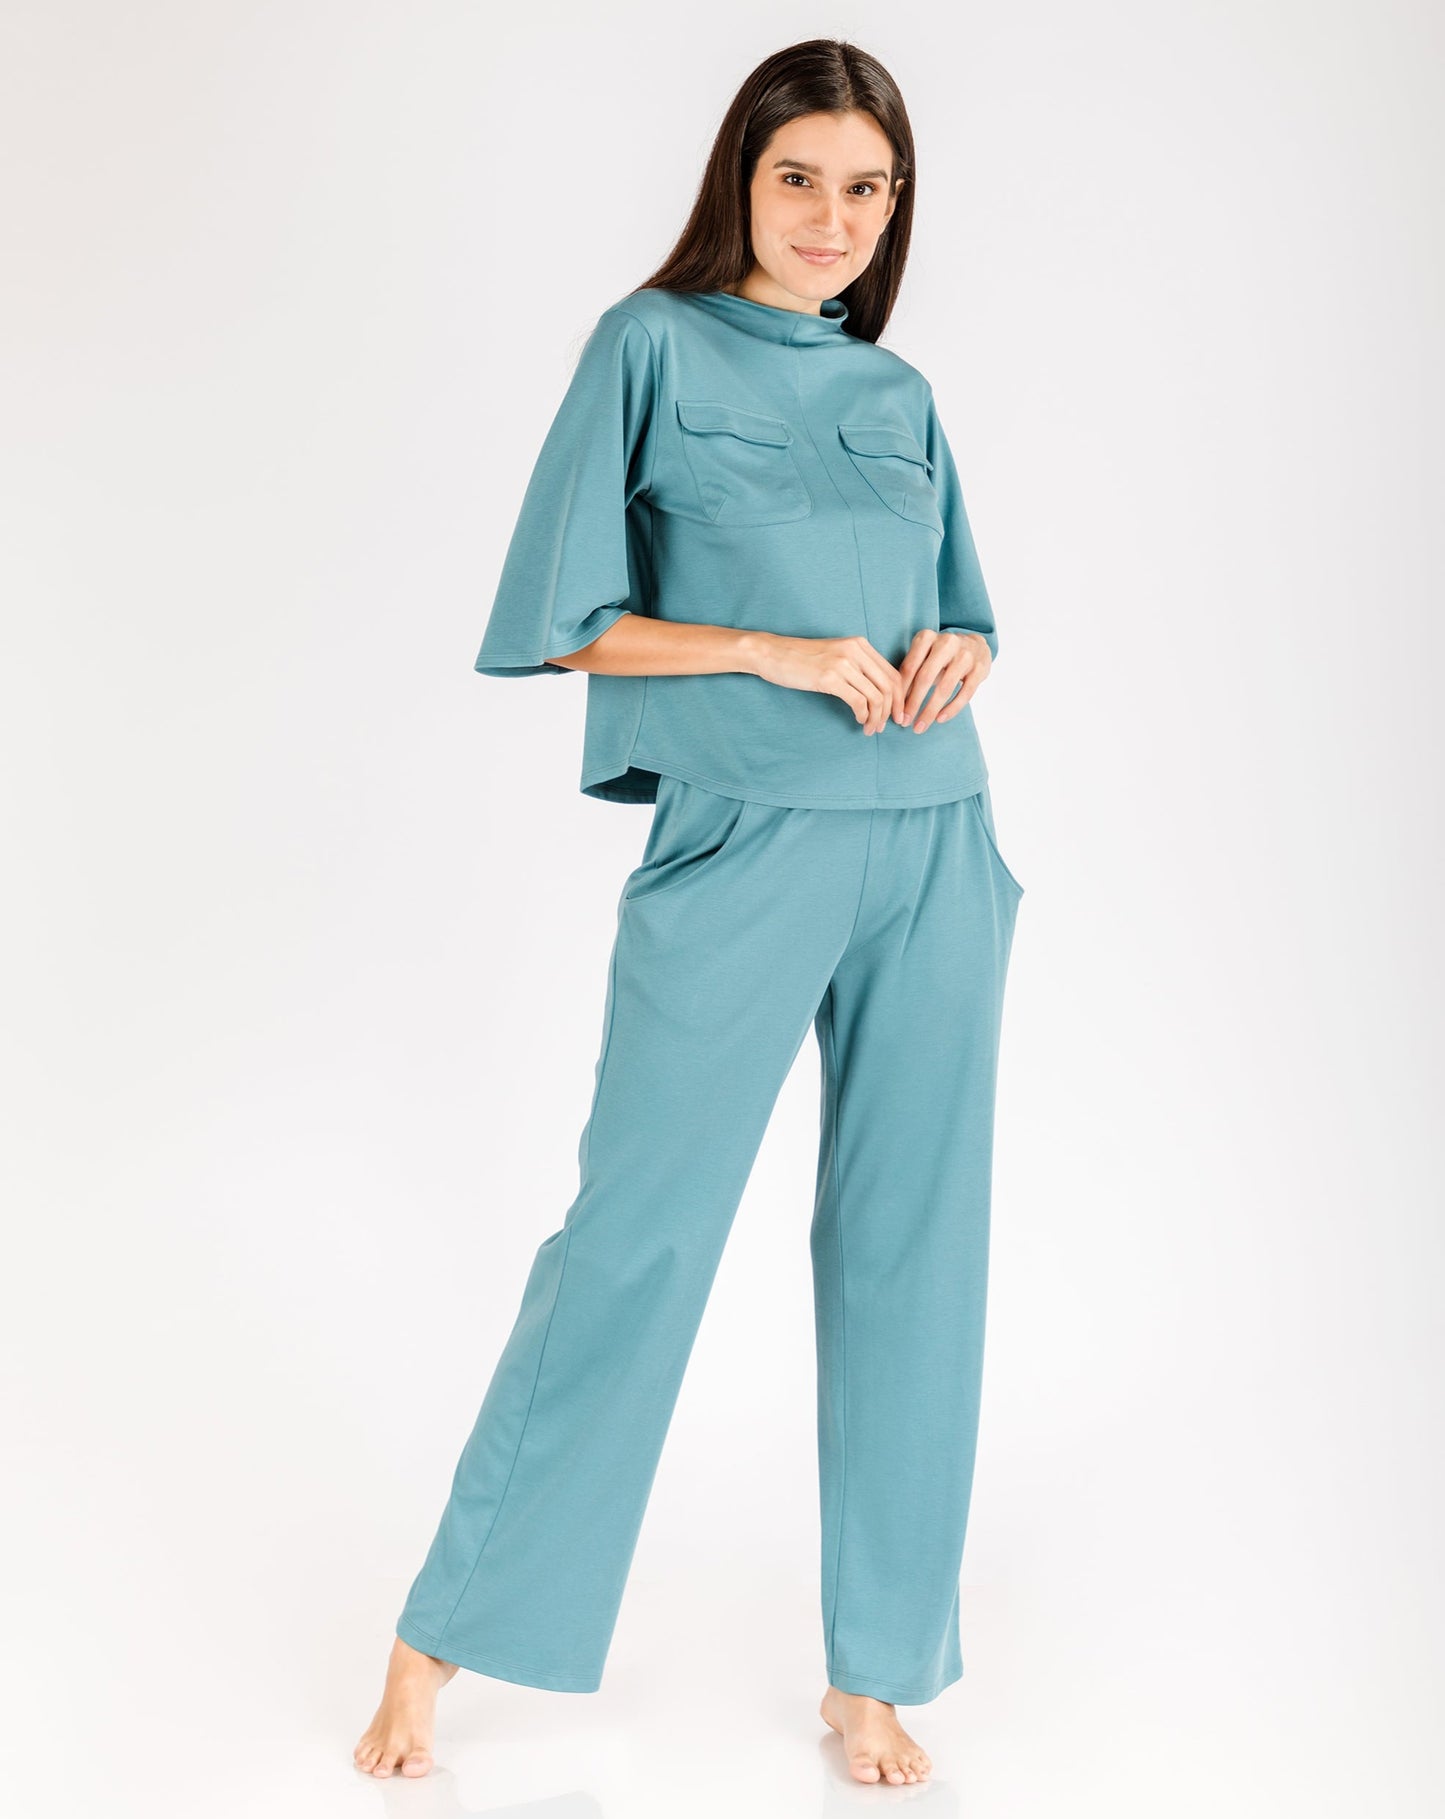 women_s-pajama-set-Straight-pant-and-cami-with-wide-sleeves-storm blue-Lavender-Dreams